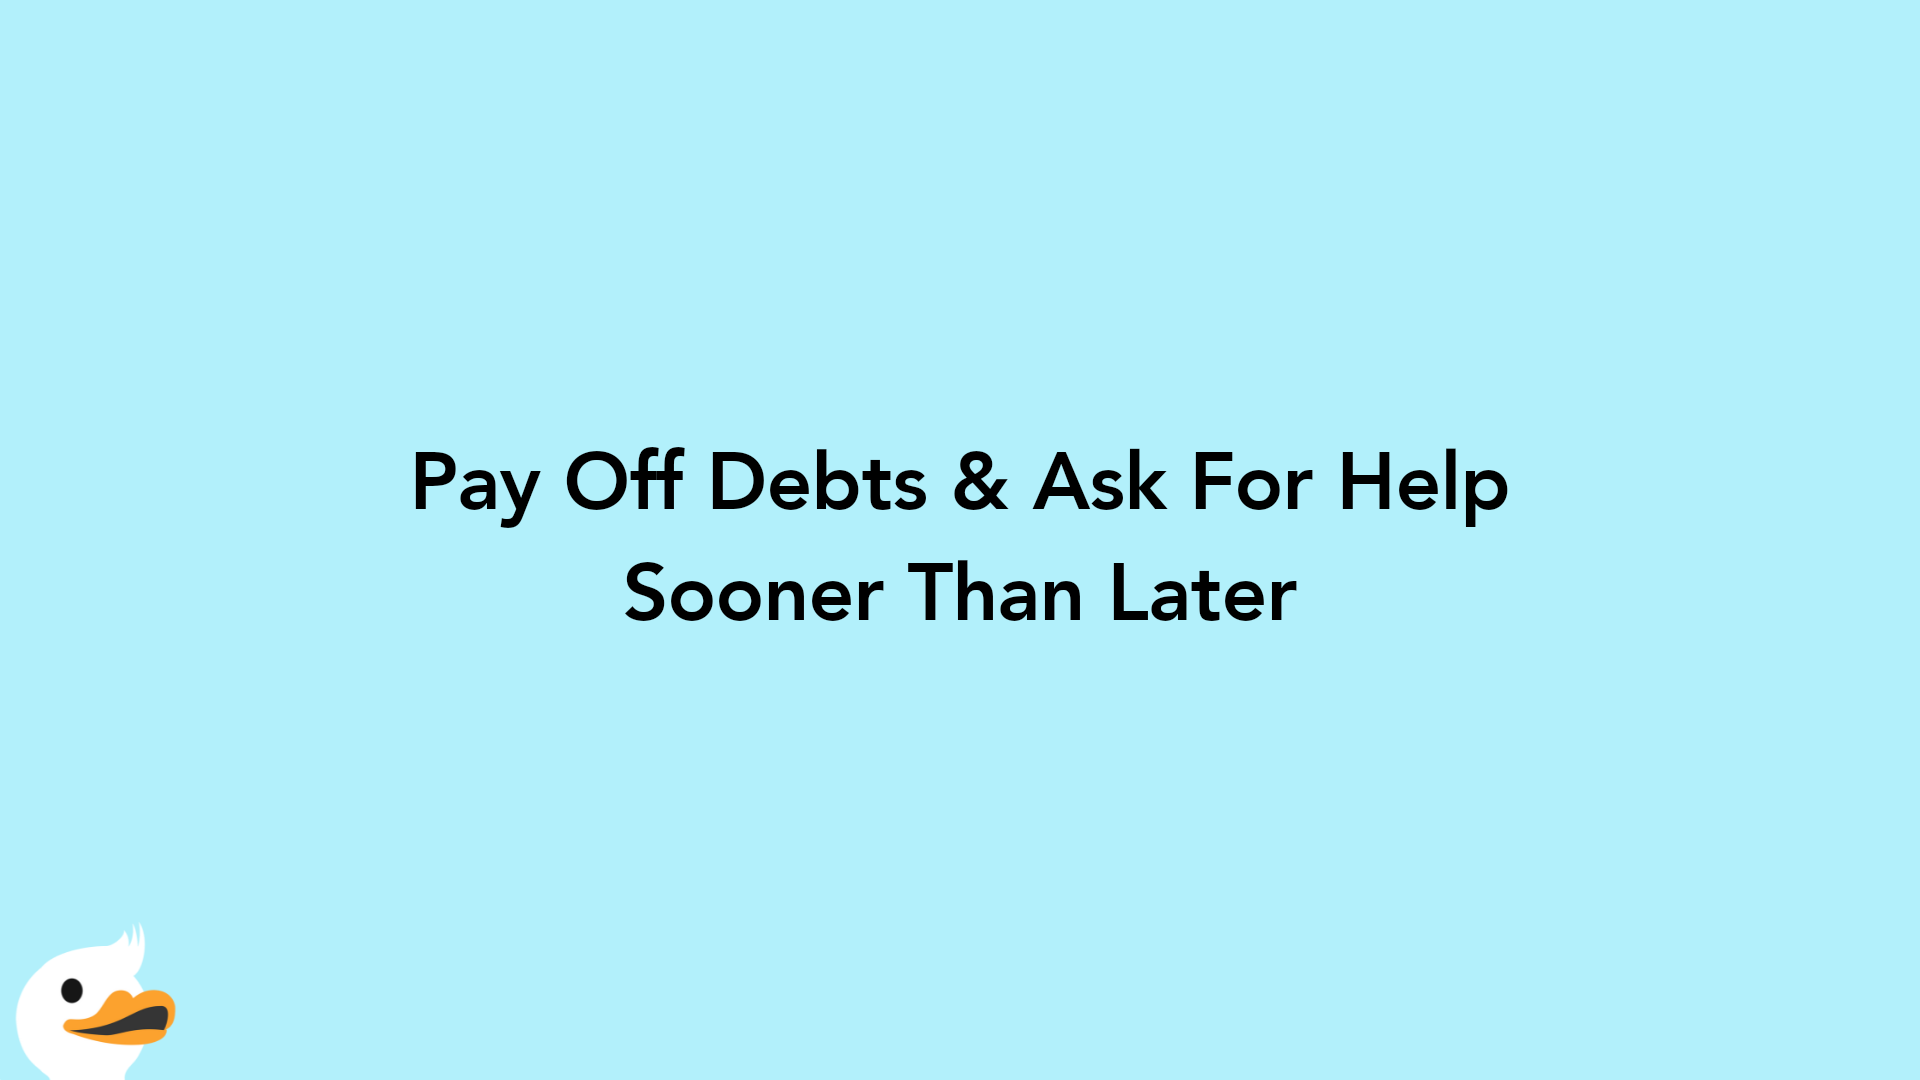 Pay Off Debts & Ask For Help Sooner Than Later